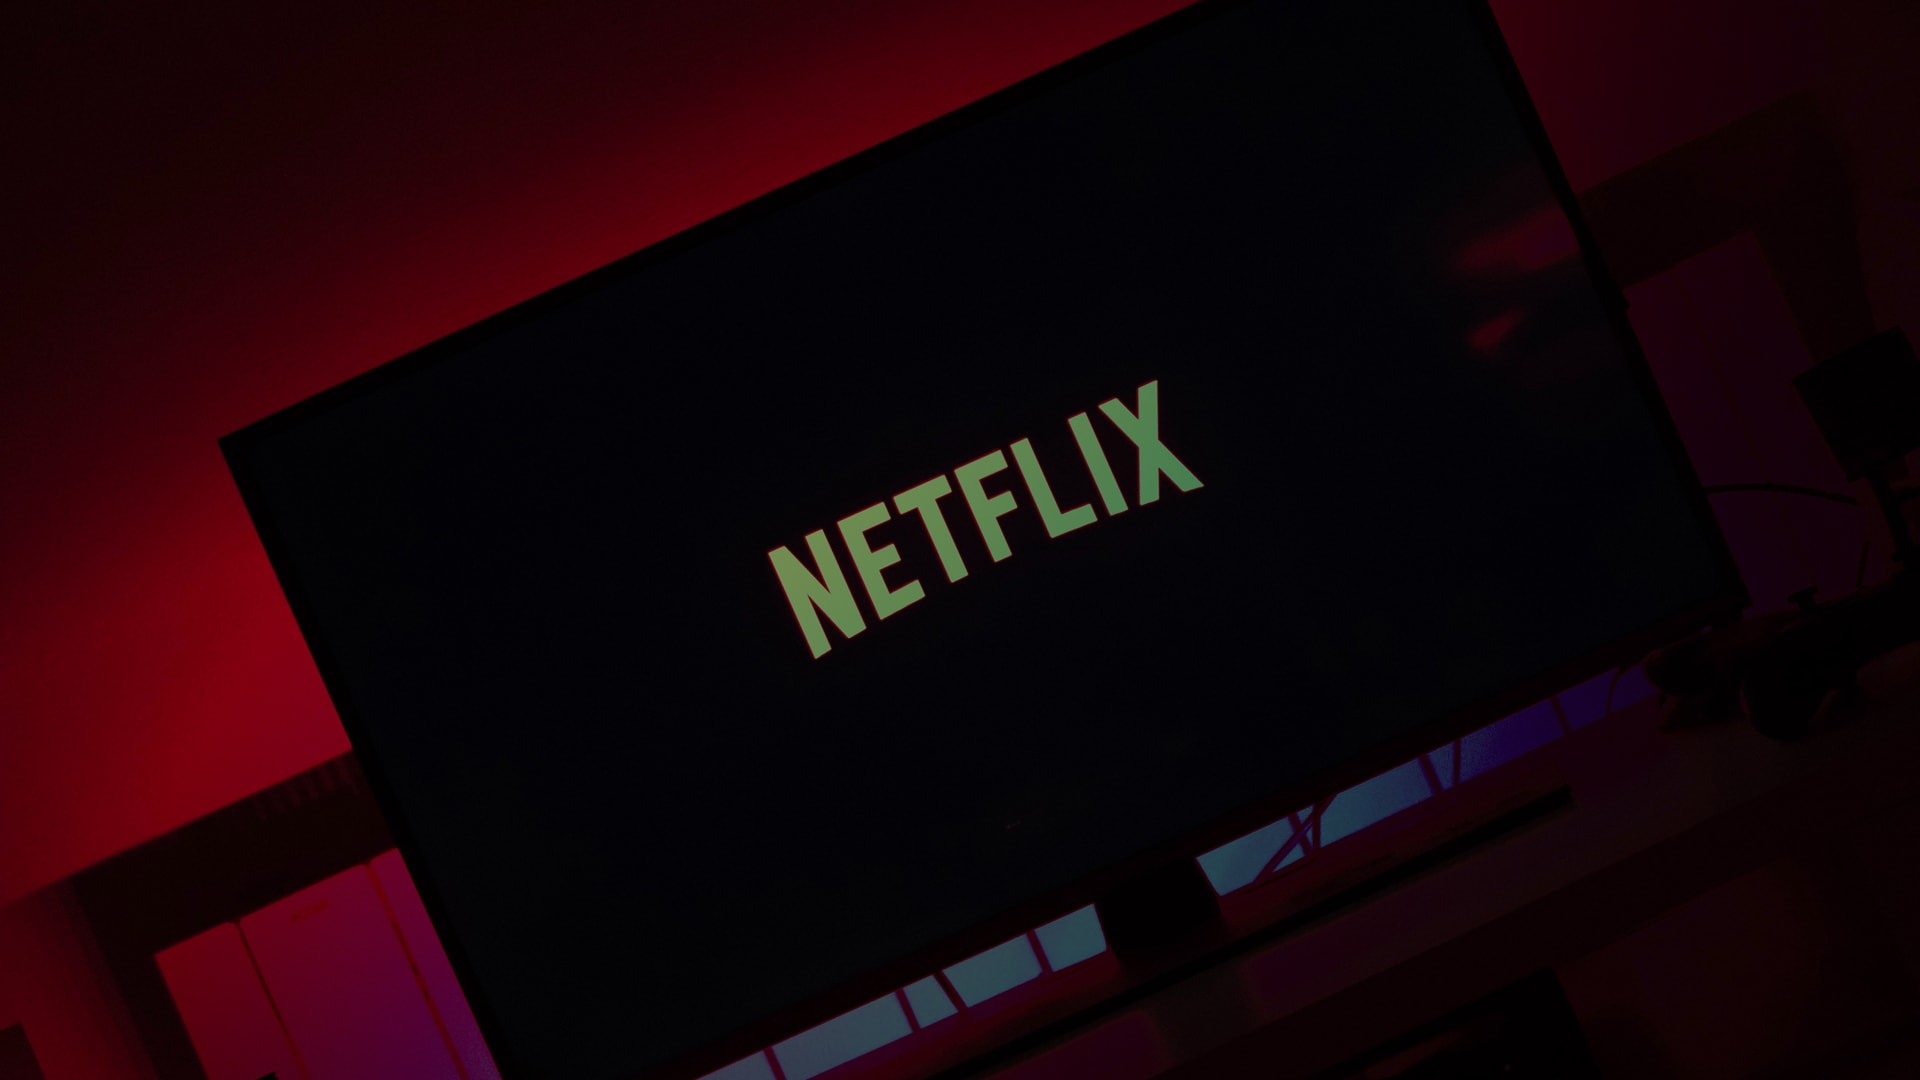 Guess what WarnerMedia’s HBO Max announcement did to Netflix stock